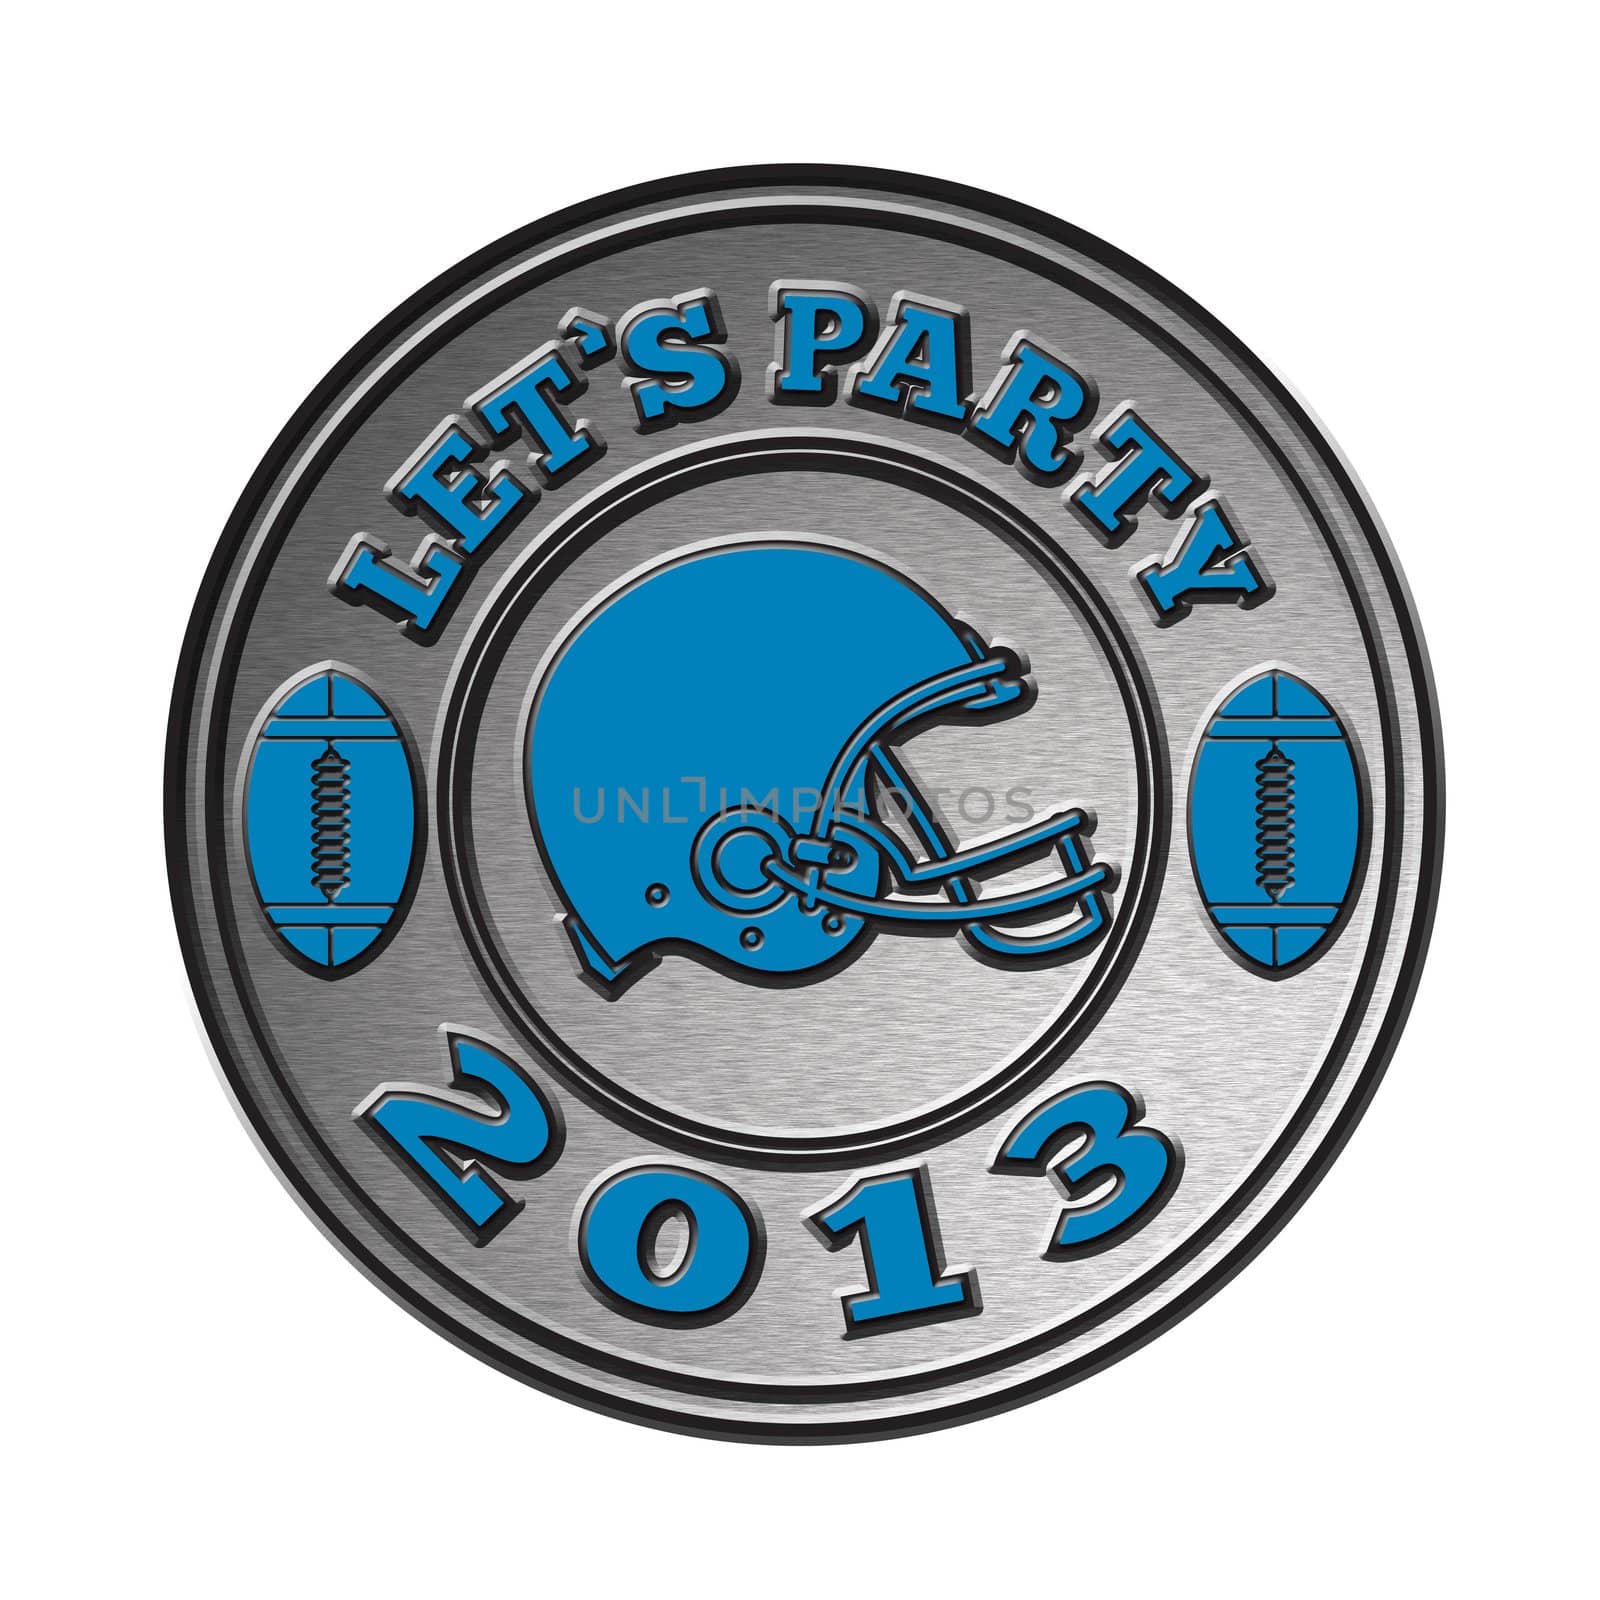 illustration of a golden american football helmet viewed from side done in metallic silver style set inside medallion circle on isolated white background with words let's party 2013.